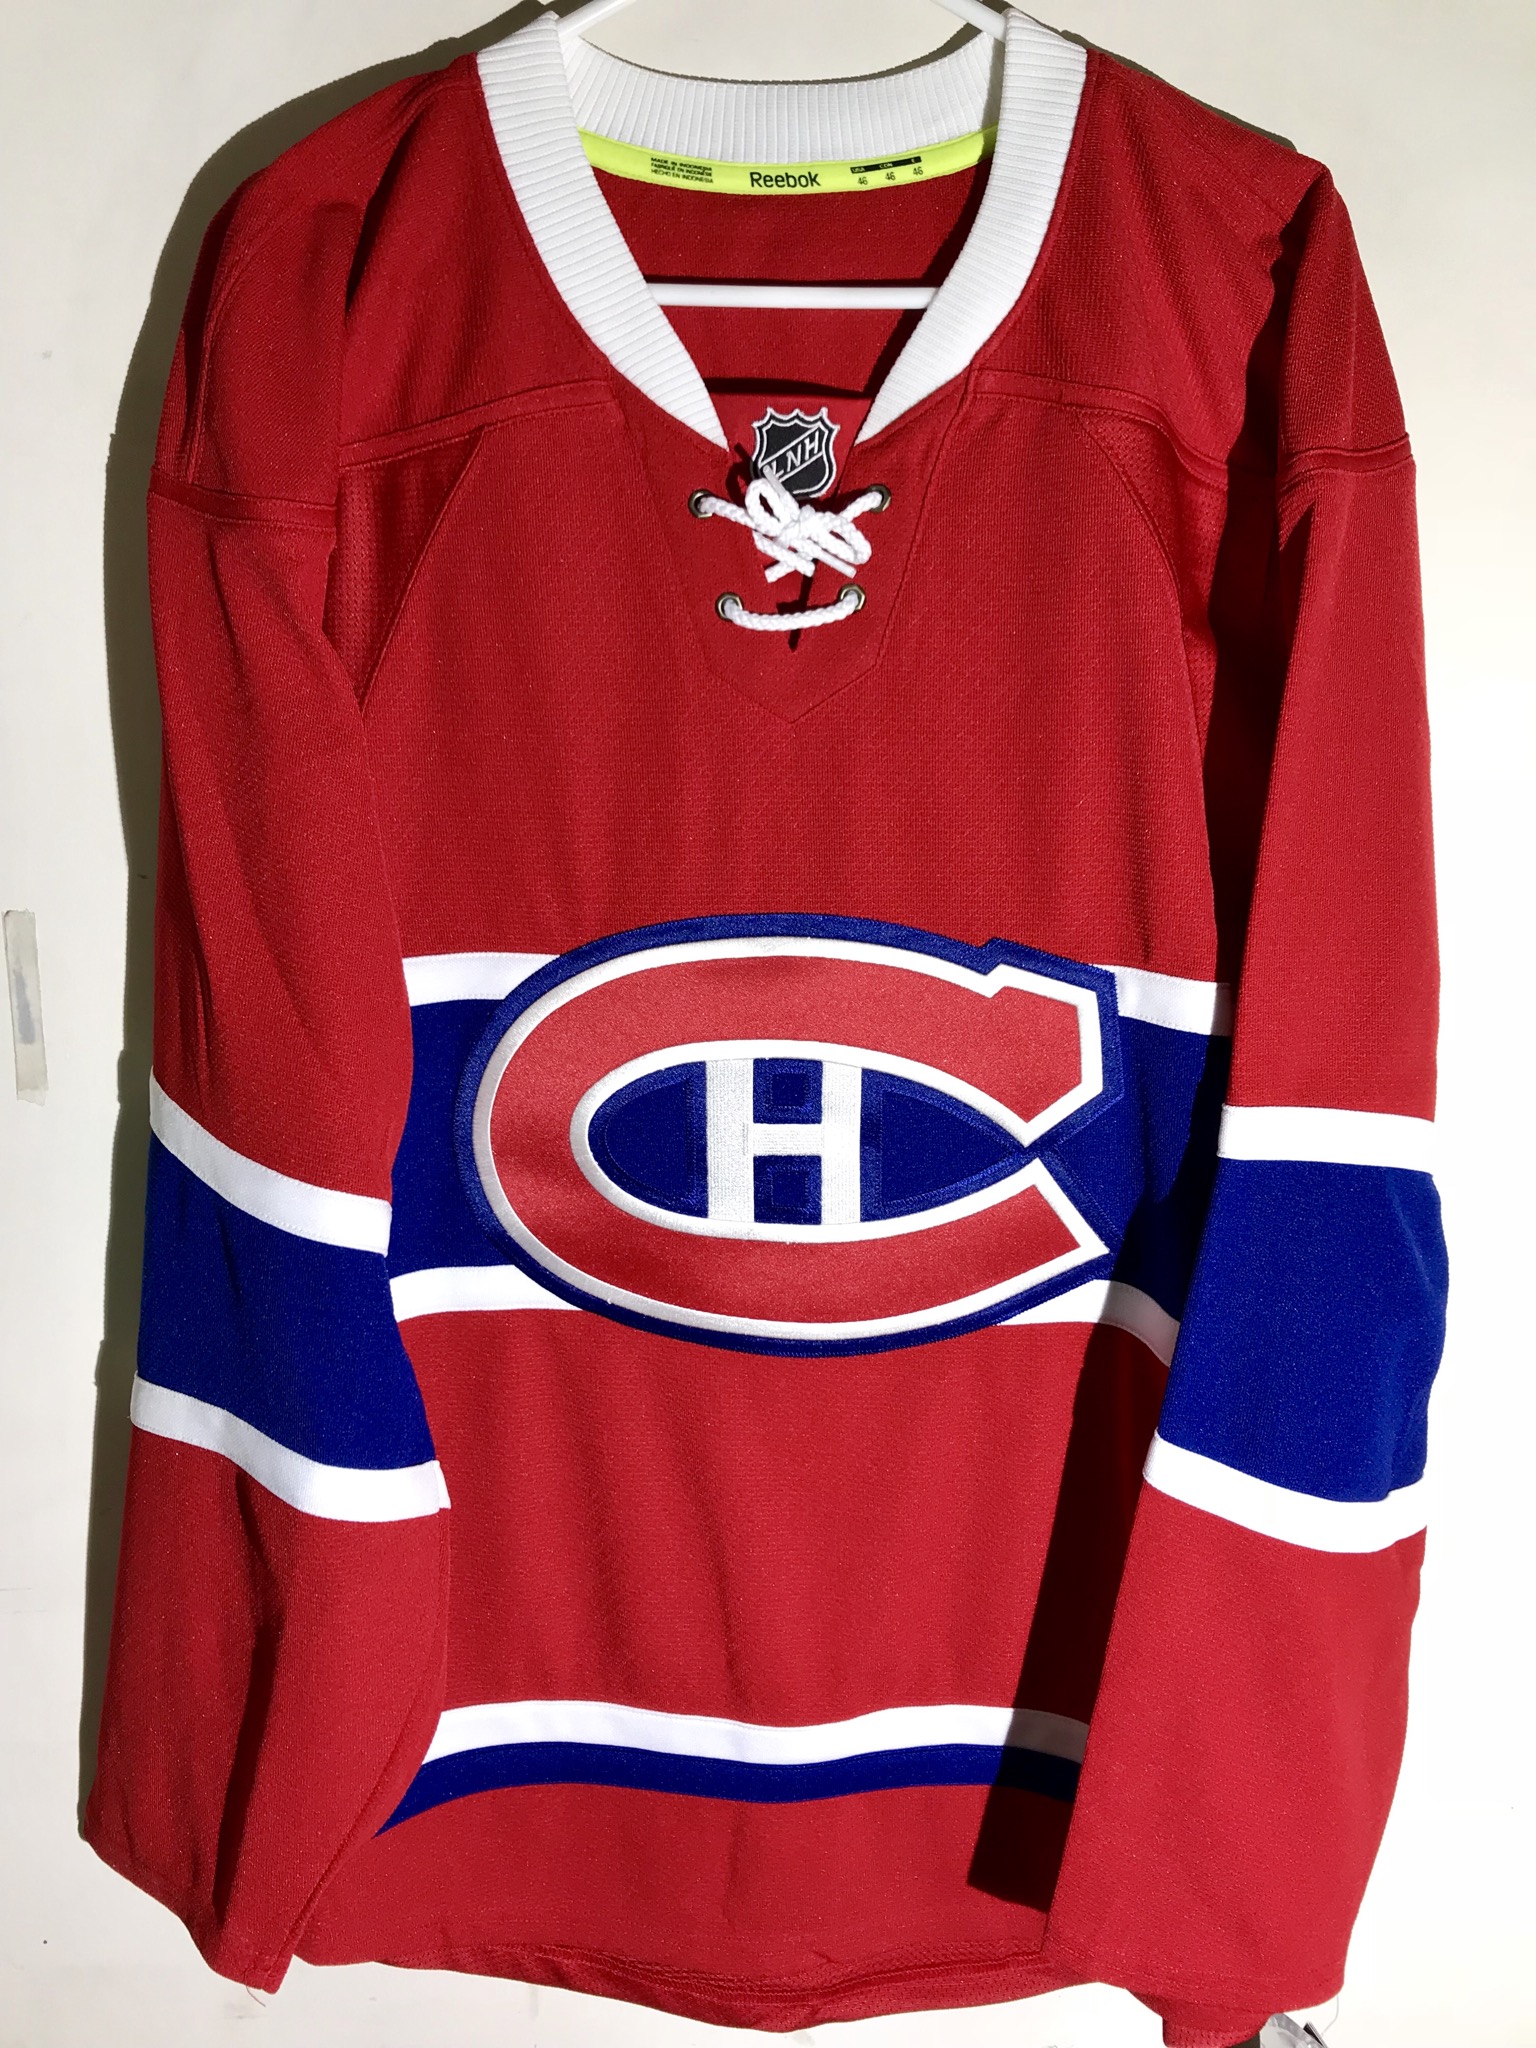 Reebok Authentic NHL Jersey Montreal 